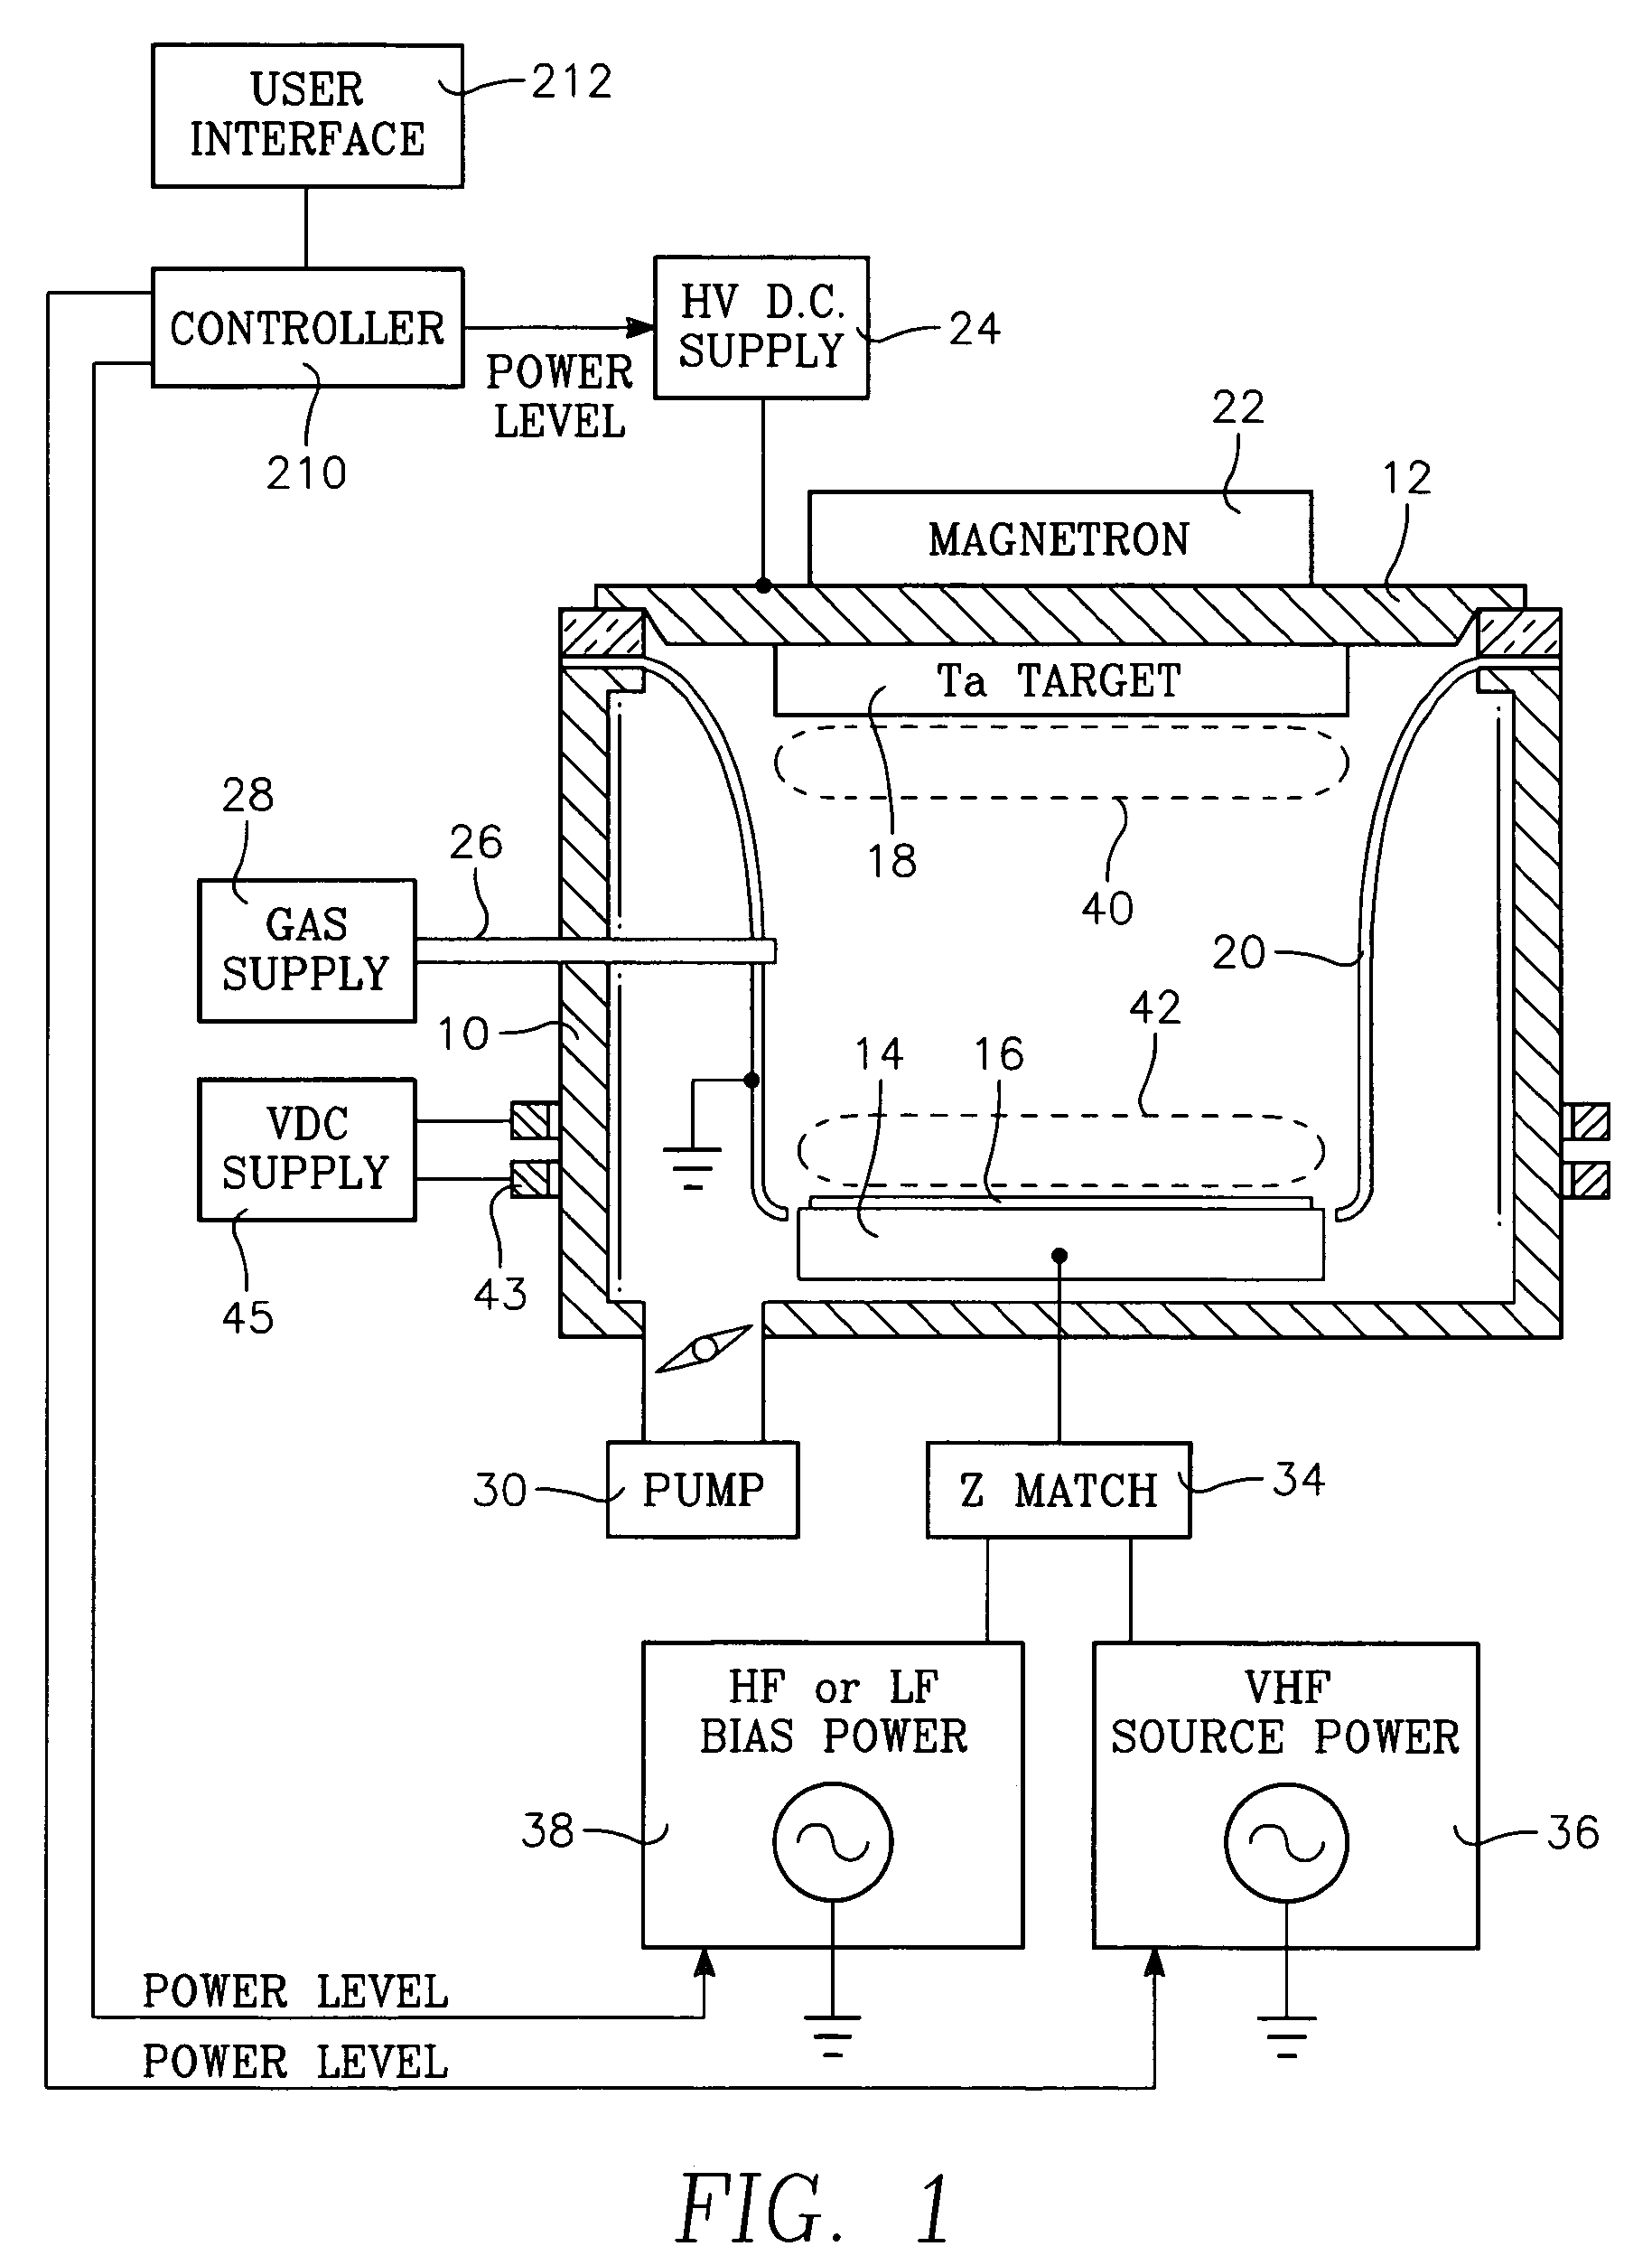 Apparatus for plasma-enhanced physical vapor deposition of copper with RF source power applied through the workpiece